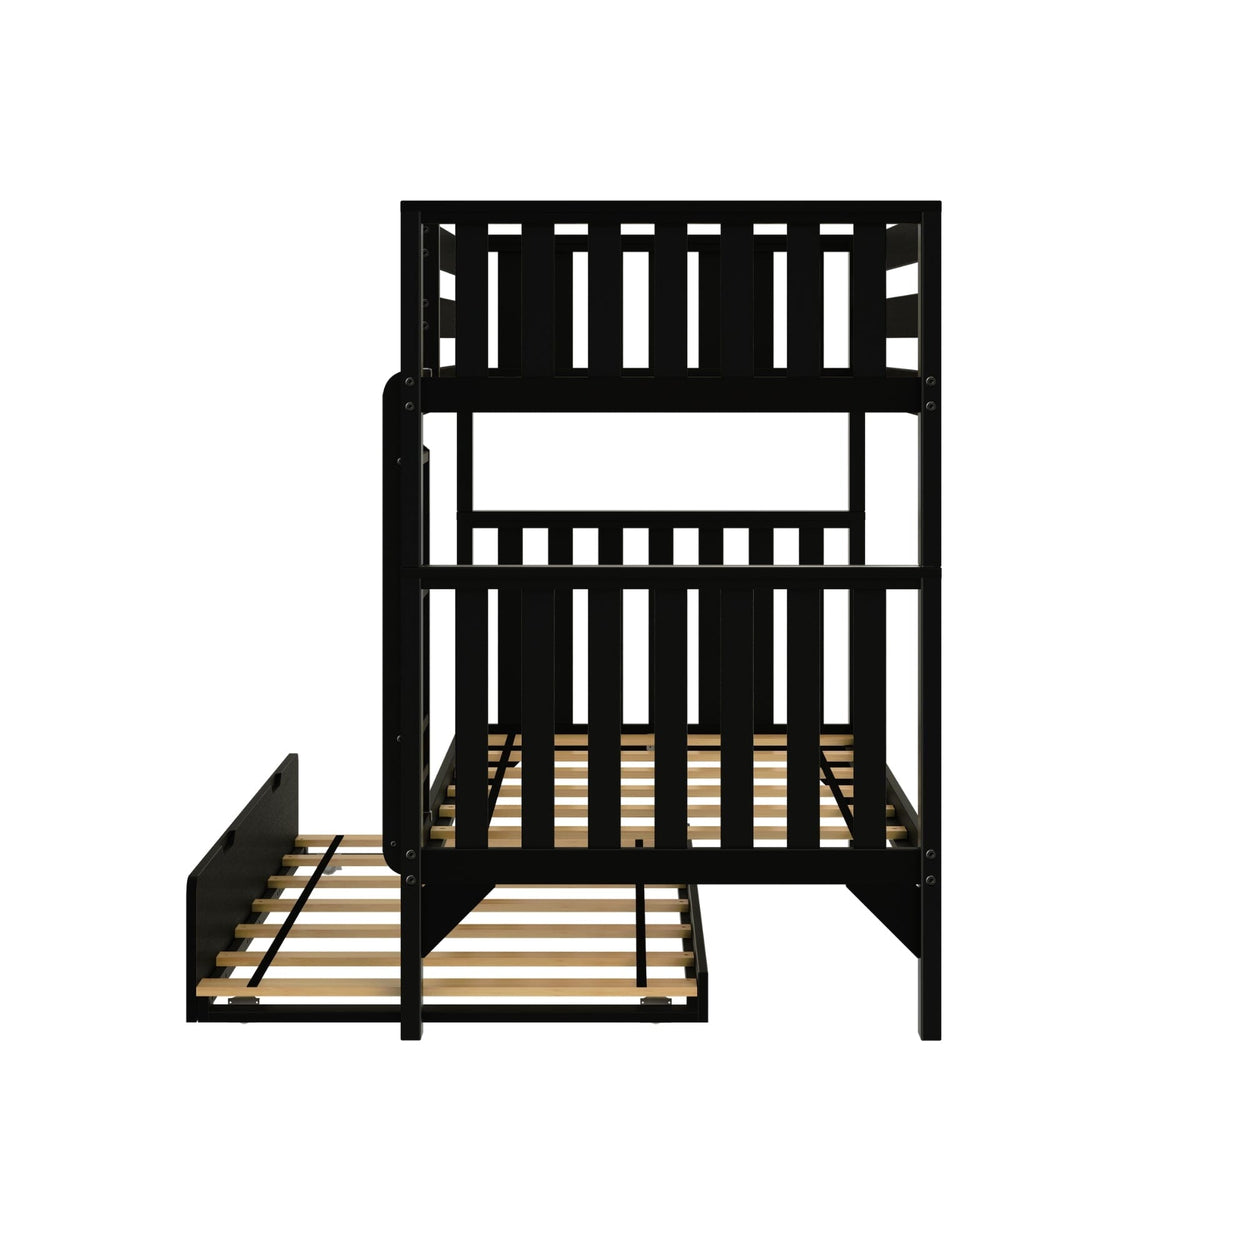 216201-170 : Bunk Beds Scandinavian Twin over Twin Bunk Bed with Twin-Size Trundle, Black